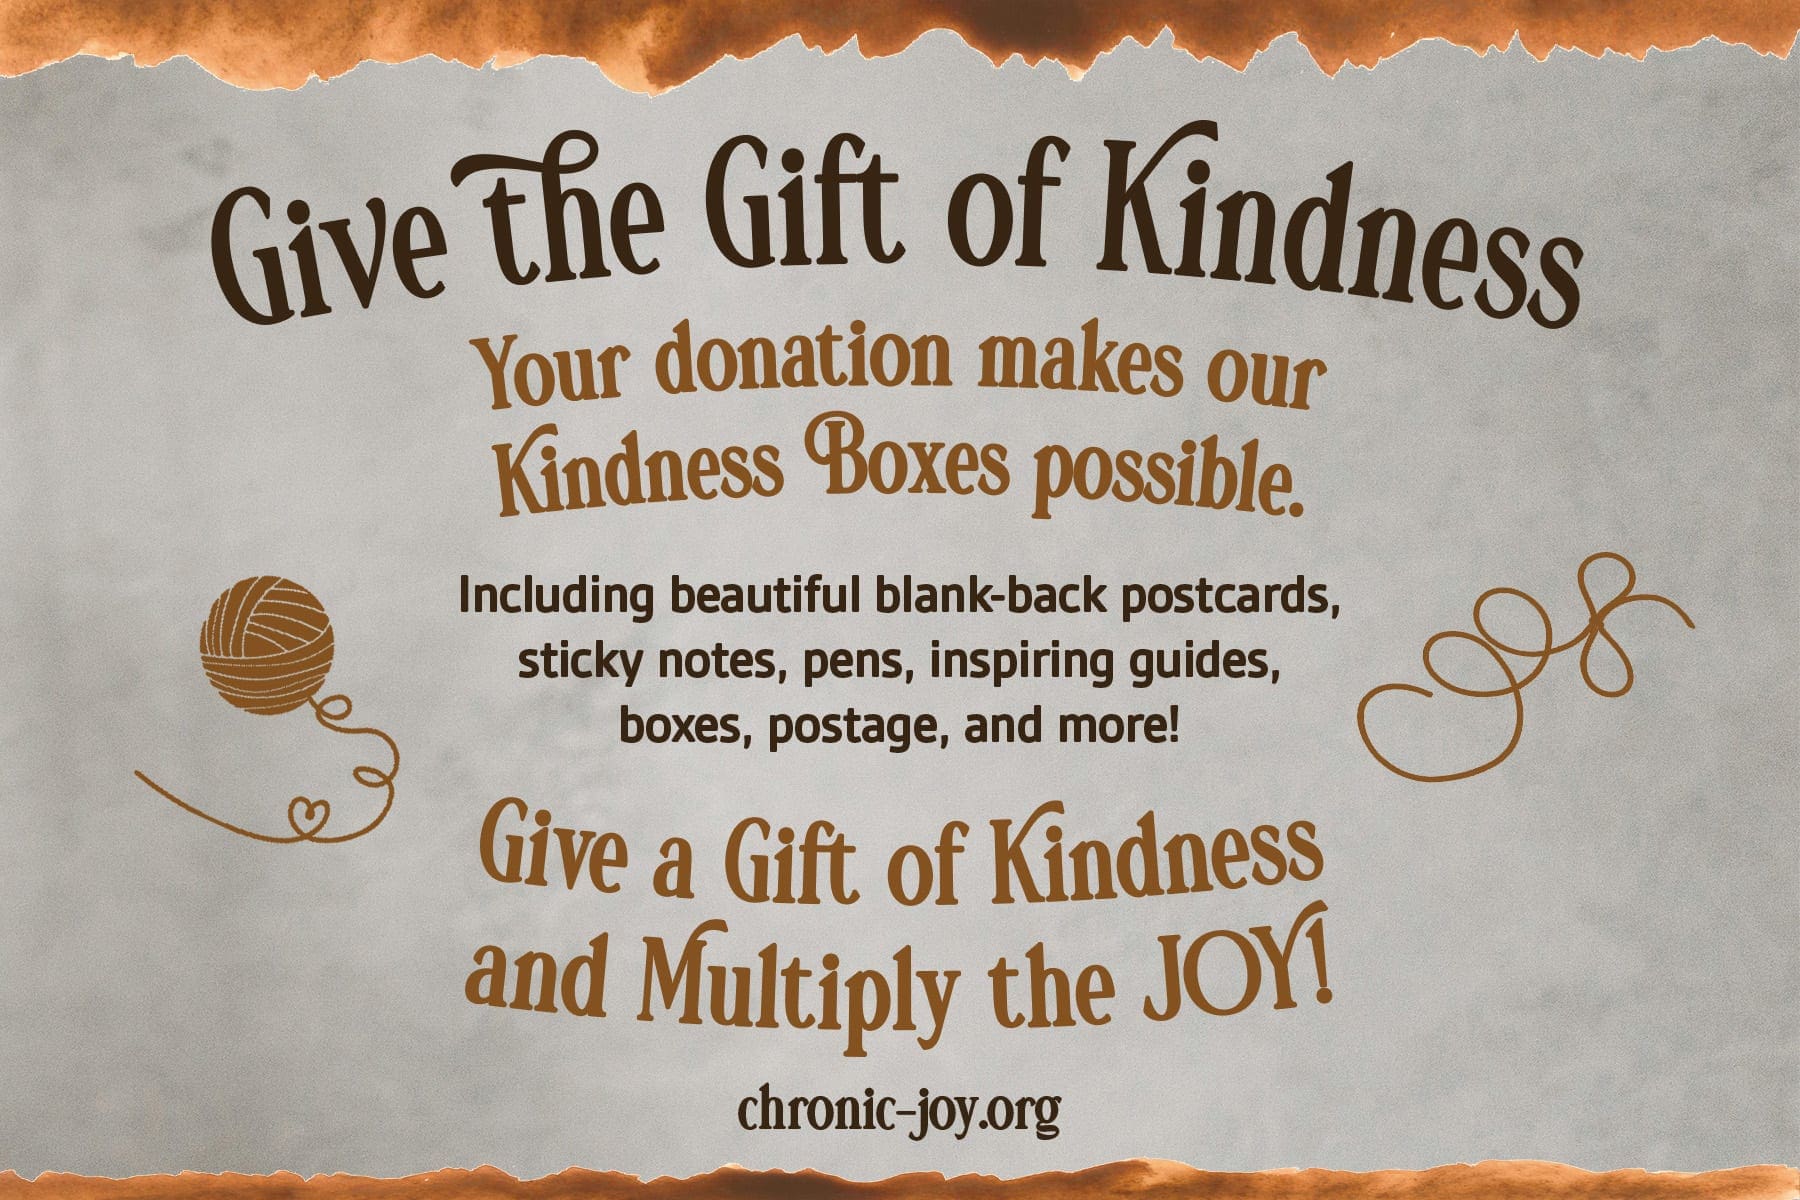 Give the Gift of Kindness! Your donation makes our Kindness Boxes possible, including beautiful blank-back postcards, sticky notes, pens, inspiring guides, boxes, postage, and more! Give a Gift of Kindness and Multiply the Joy!